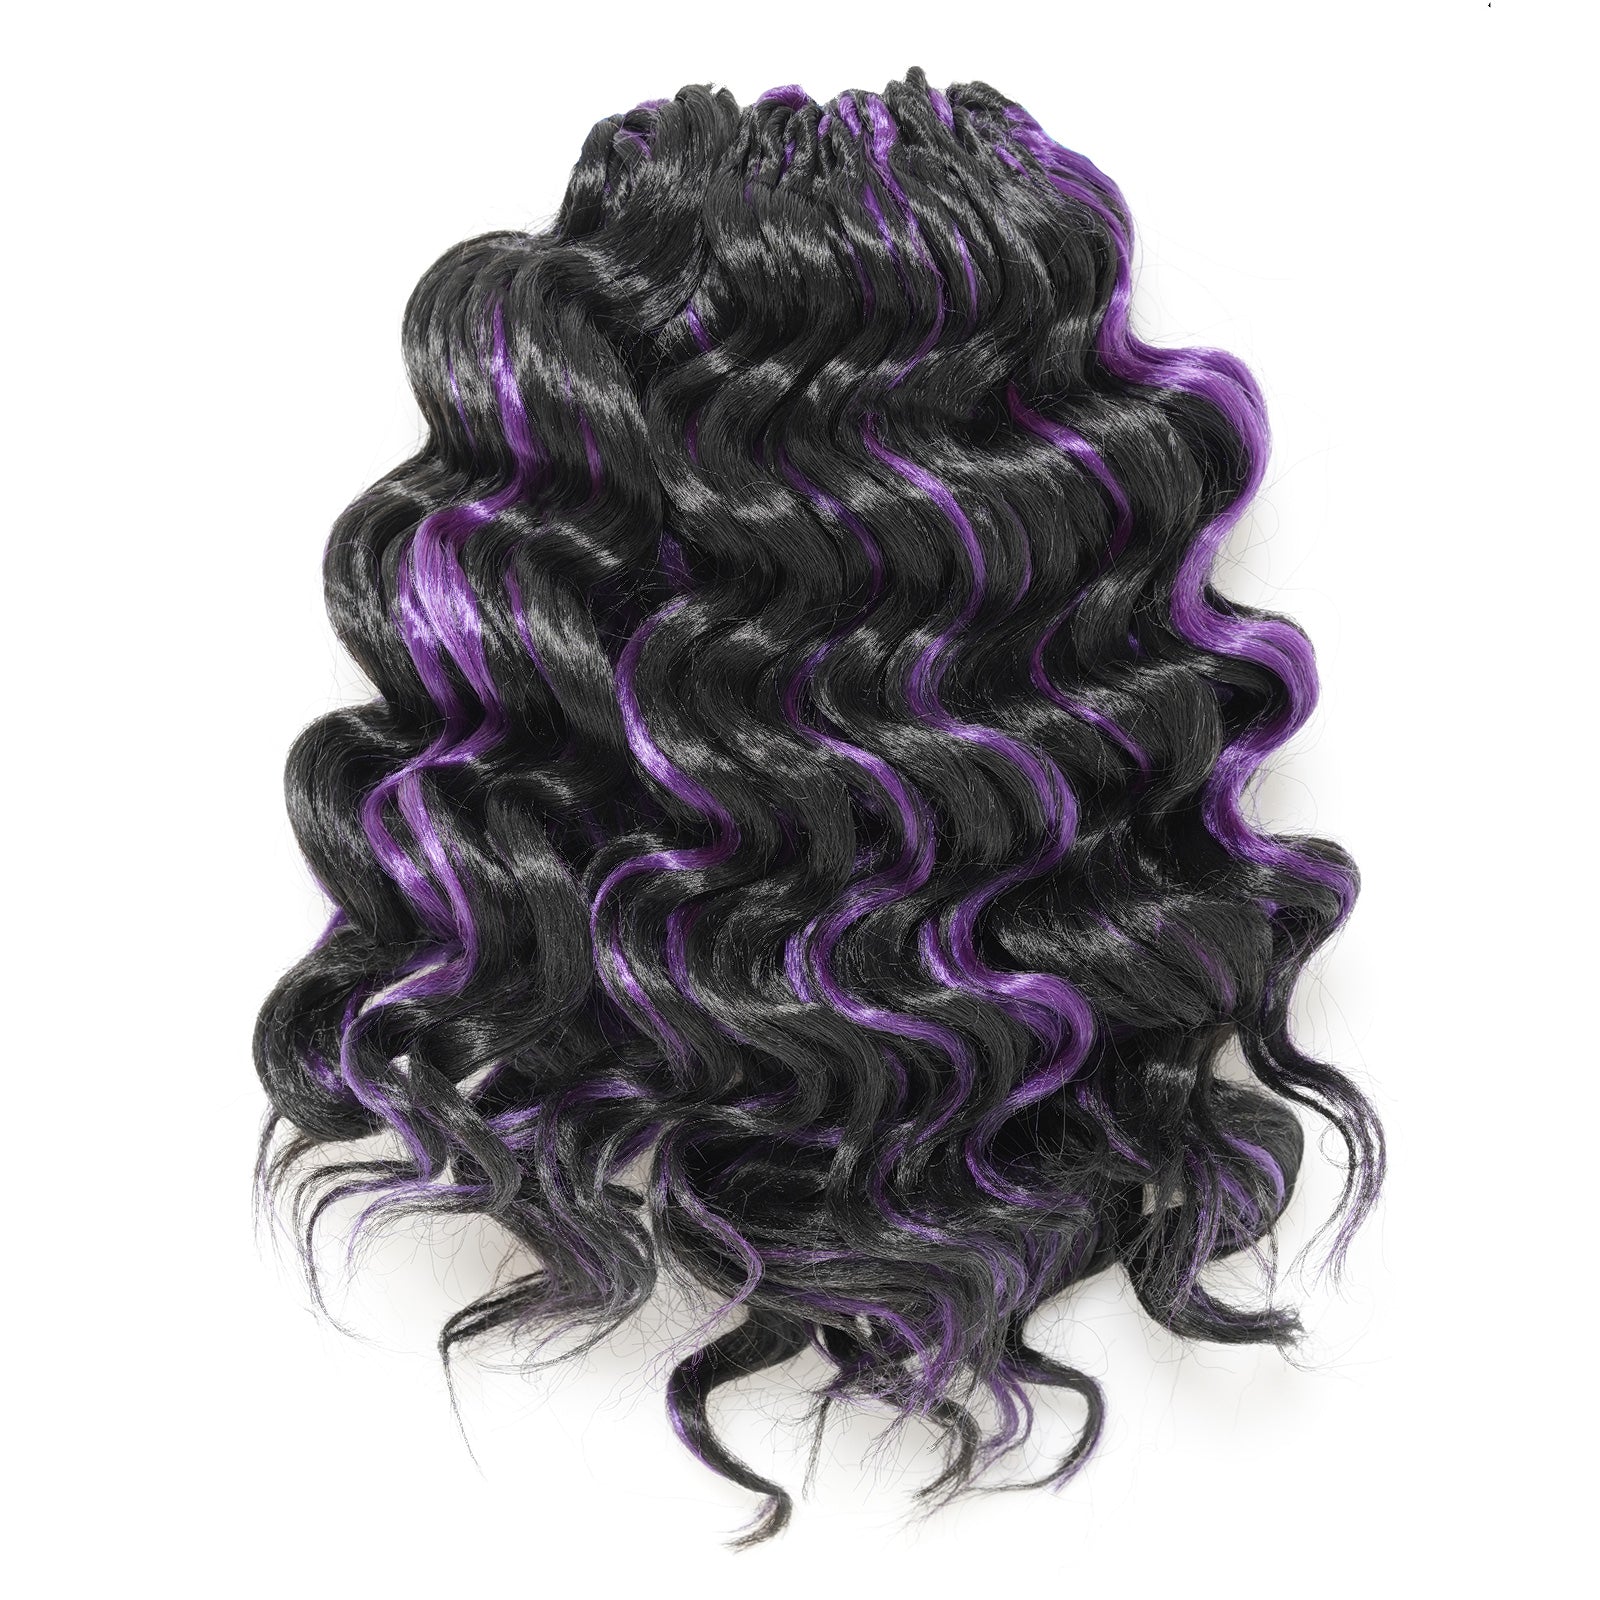 Clearance |  Ocean Wave Crochet Hair 9-30 Inch 8 Packs | Synthetic Wave Curly Hair Extensions